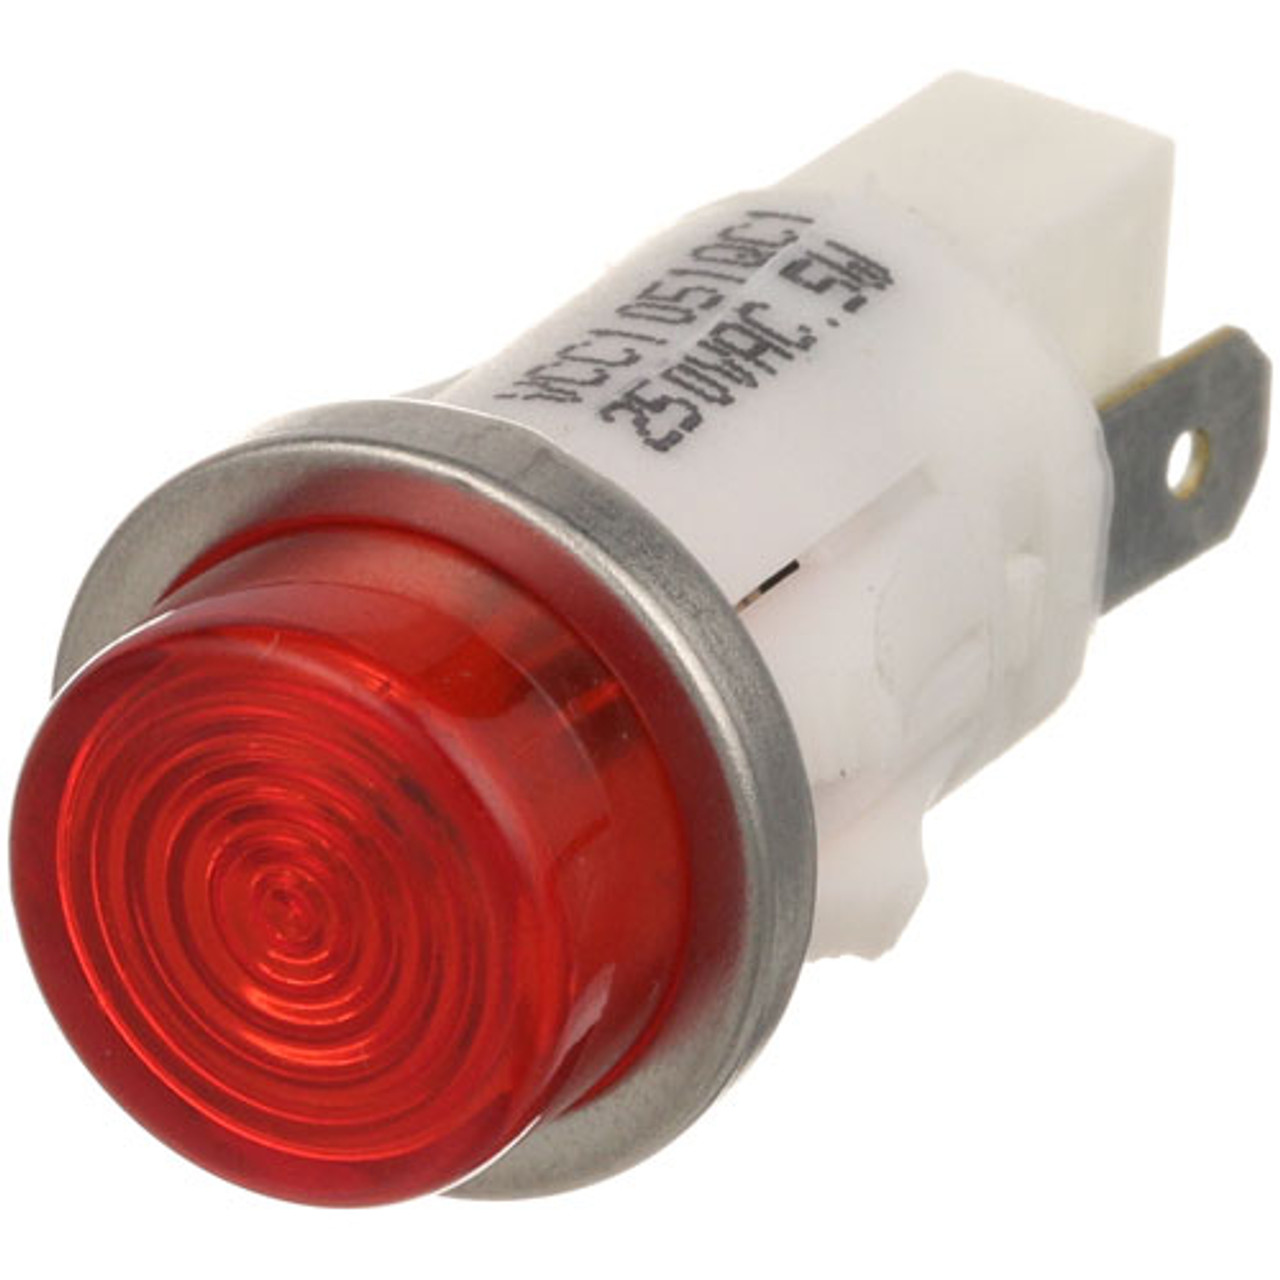 Signal Light 1/2" Red 250V - Replacement Part For Adcraft SIGNAL